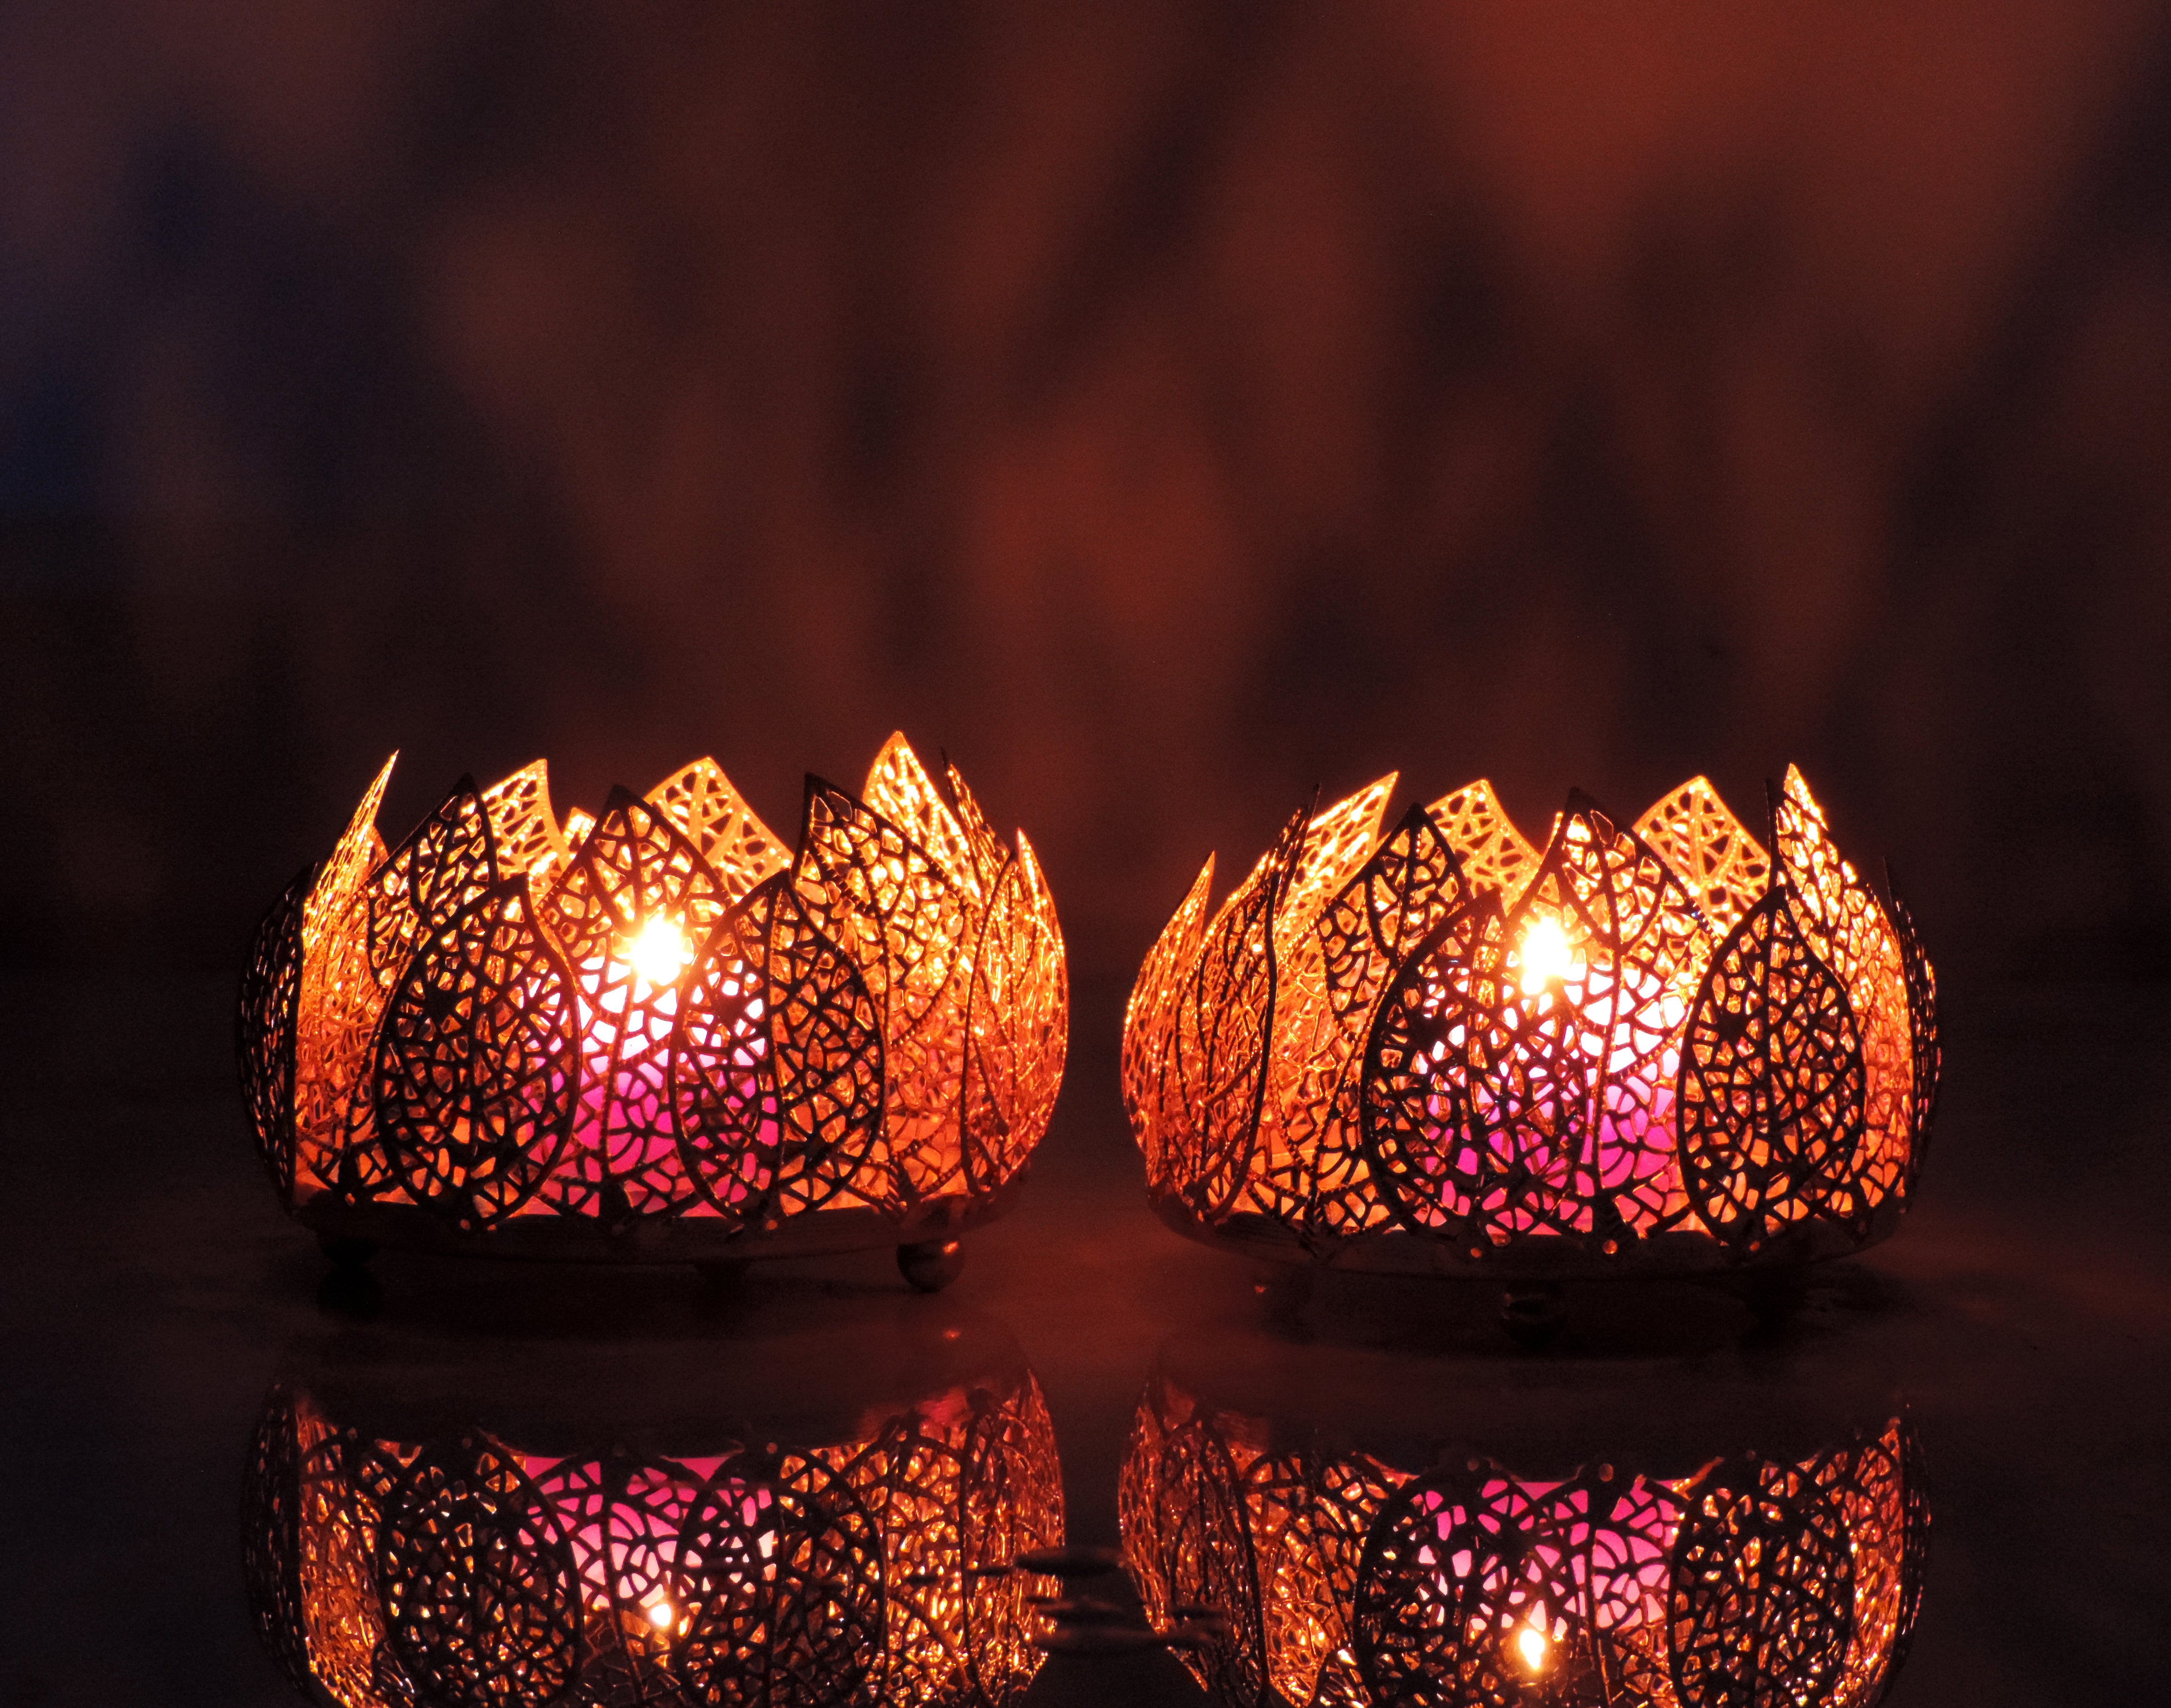 Toshakhana Collection - Set of 2 Votives with tea light holder in a Decorative Tray - Silver